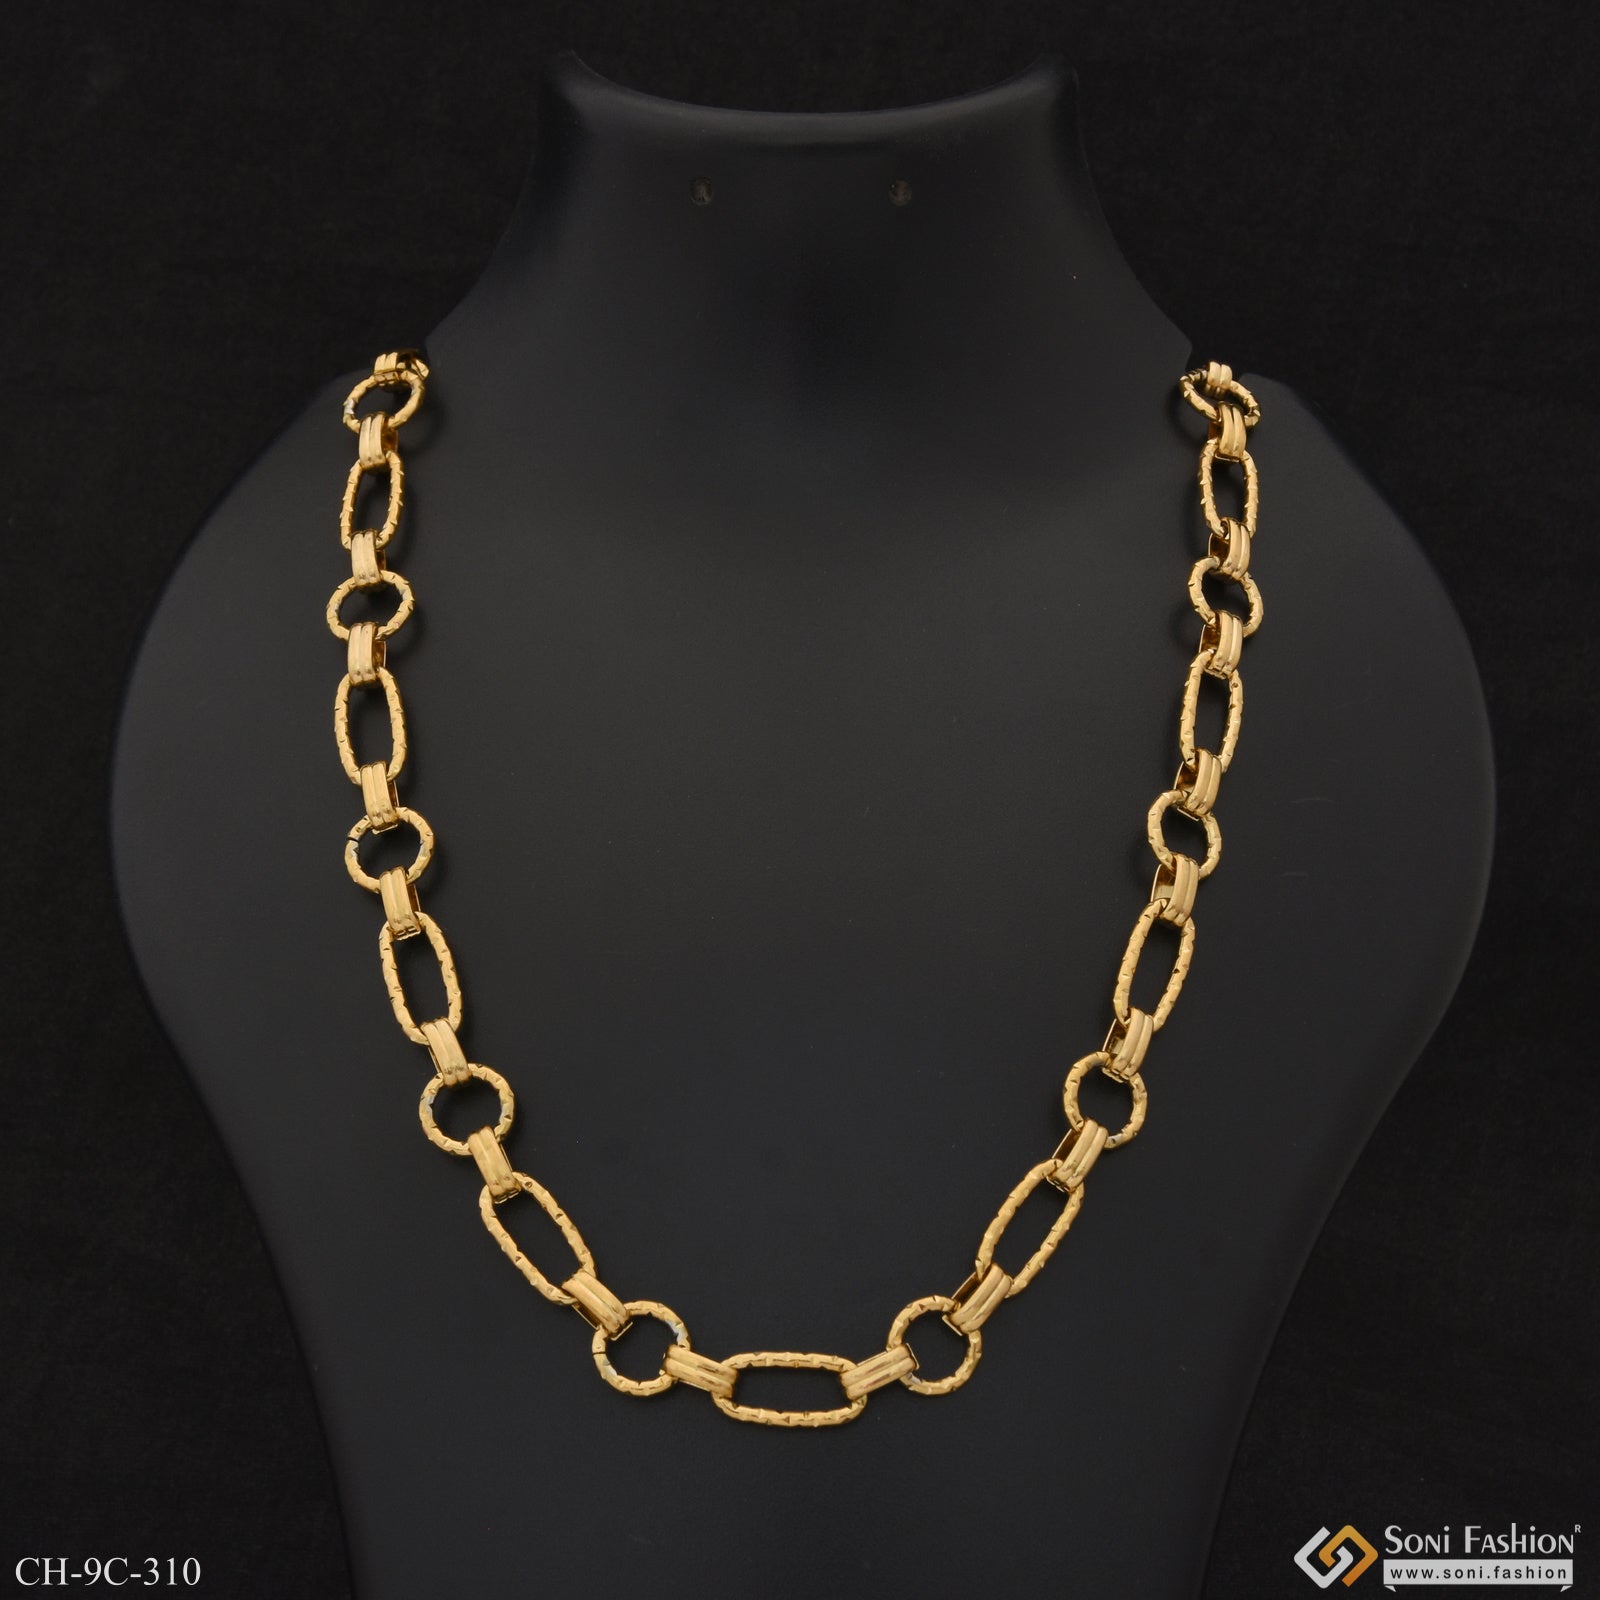 Exciting Design High-Quality Latest Design High-Quality Chain for Men - Style C310